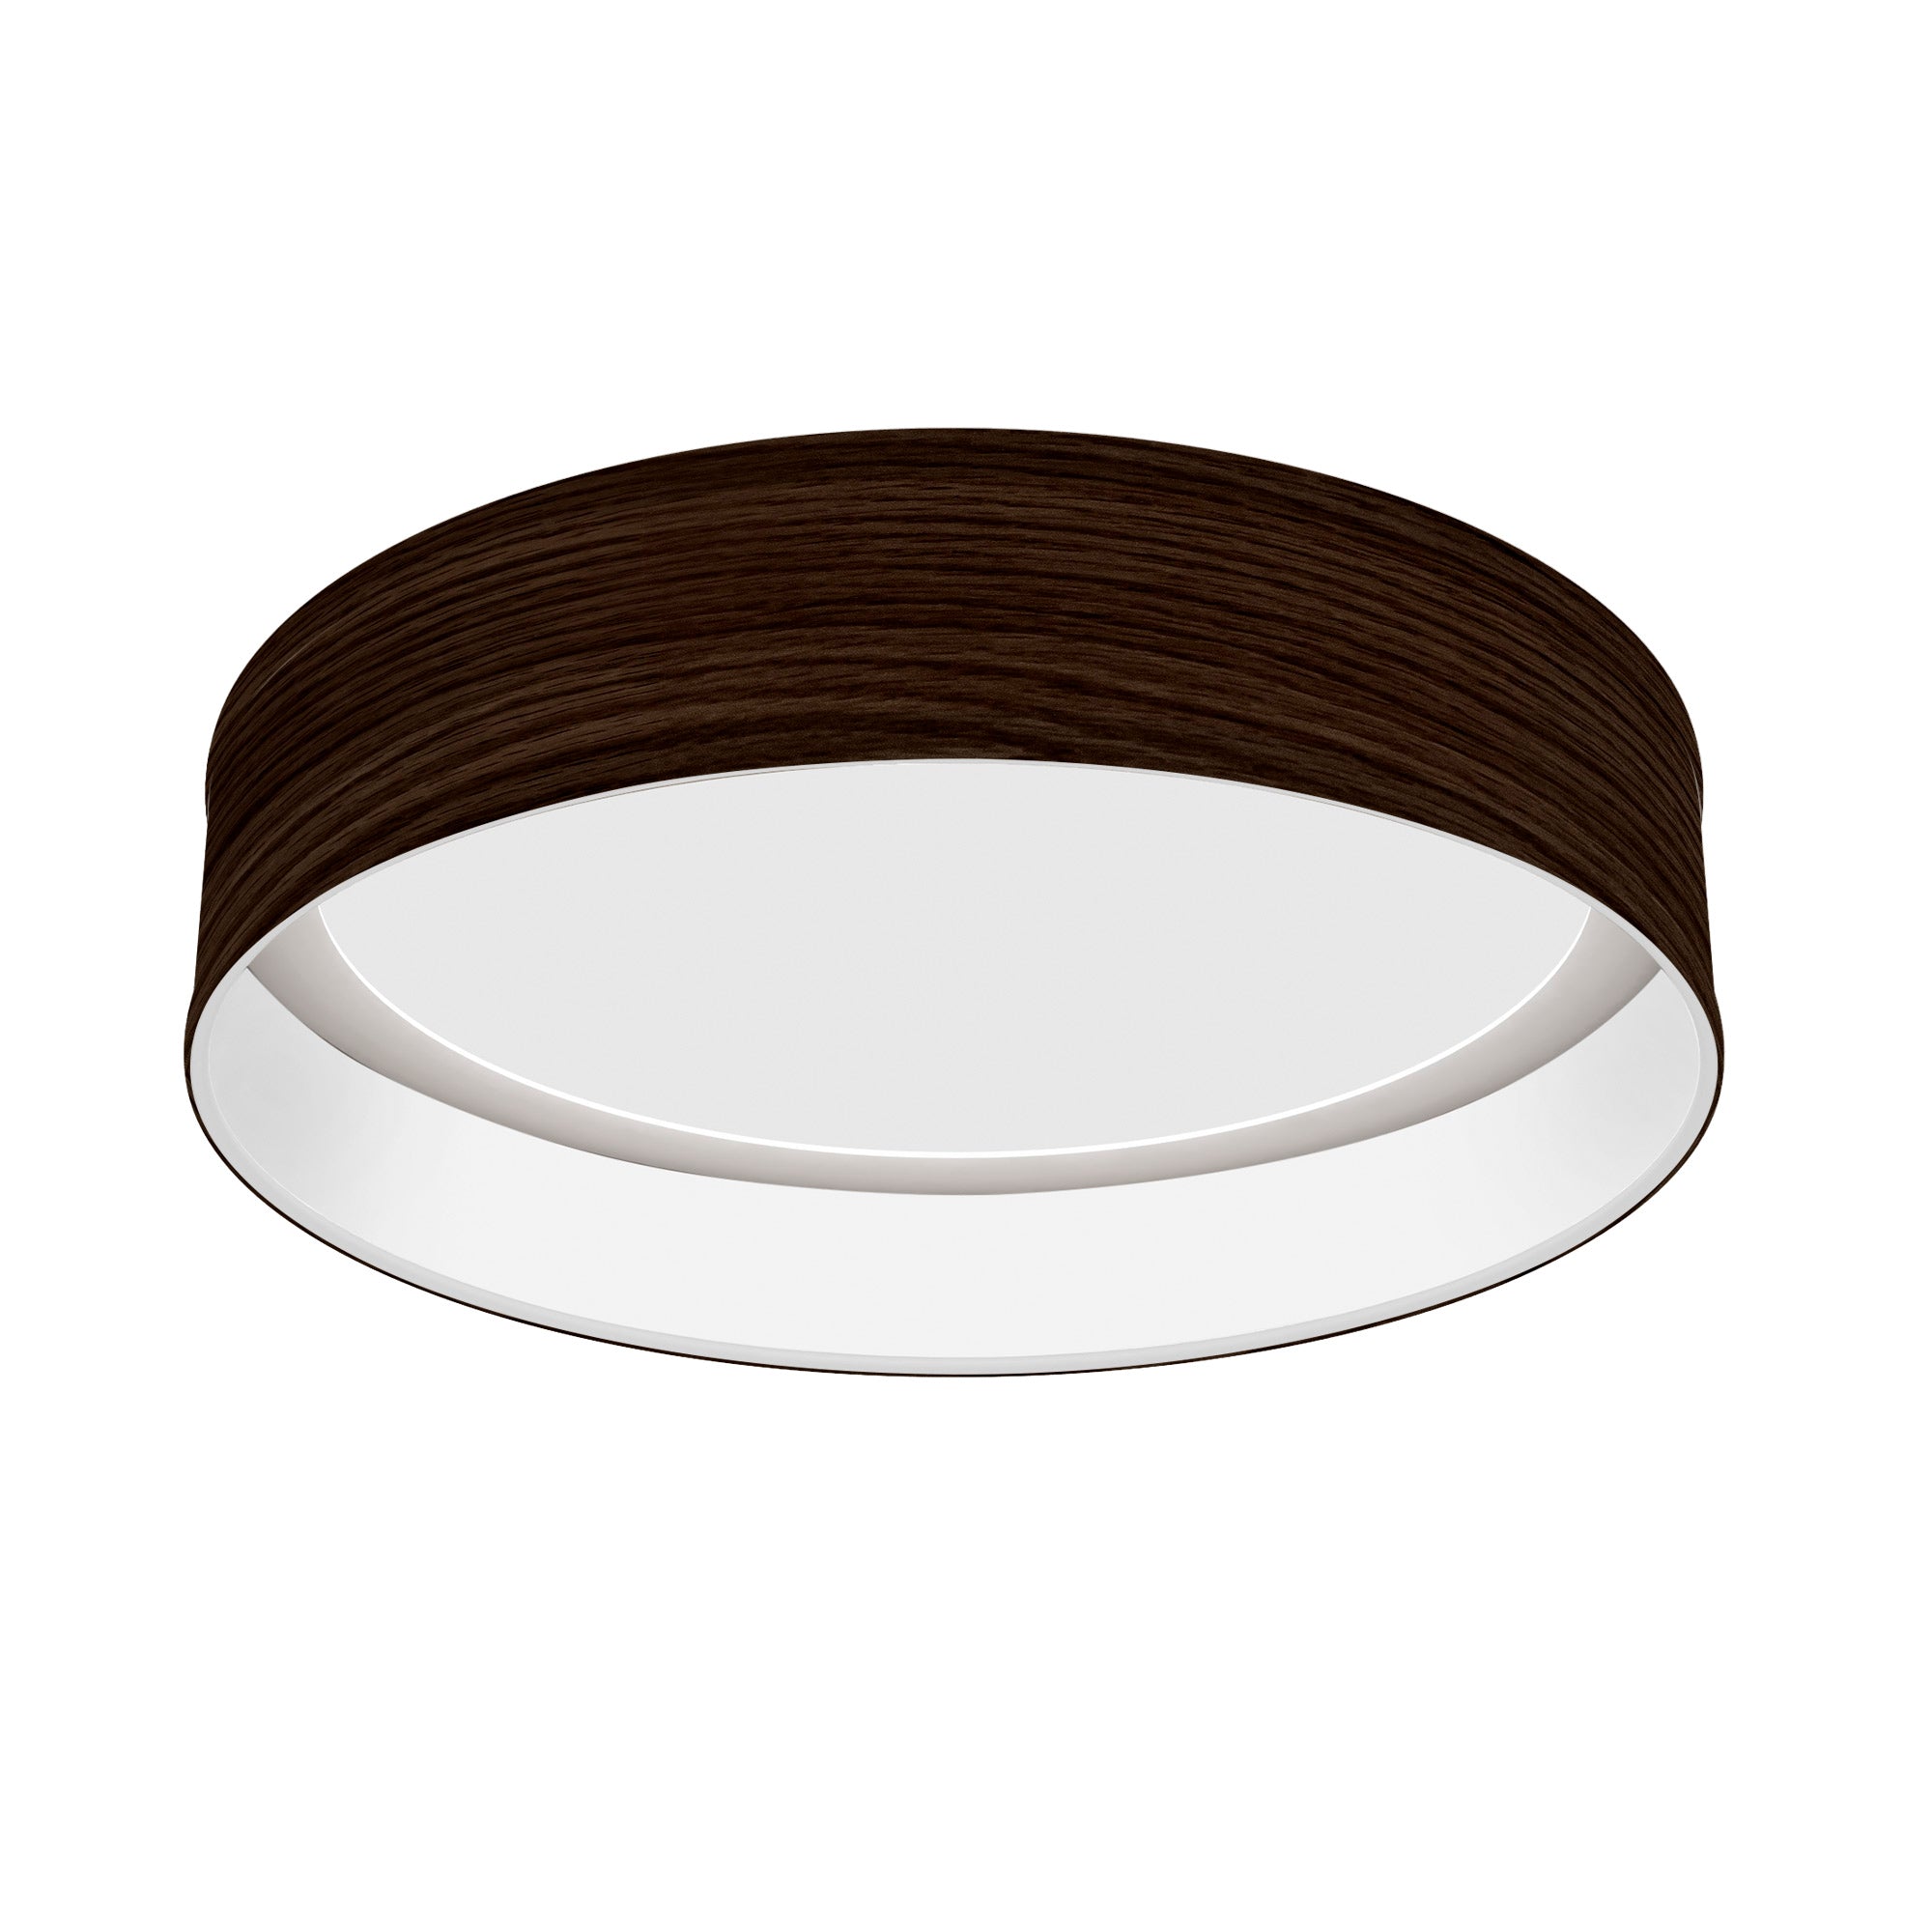 The Vince Flush Mount from Seascape Fixtures with a photo veneer shade in chocolate color.